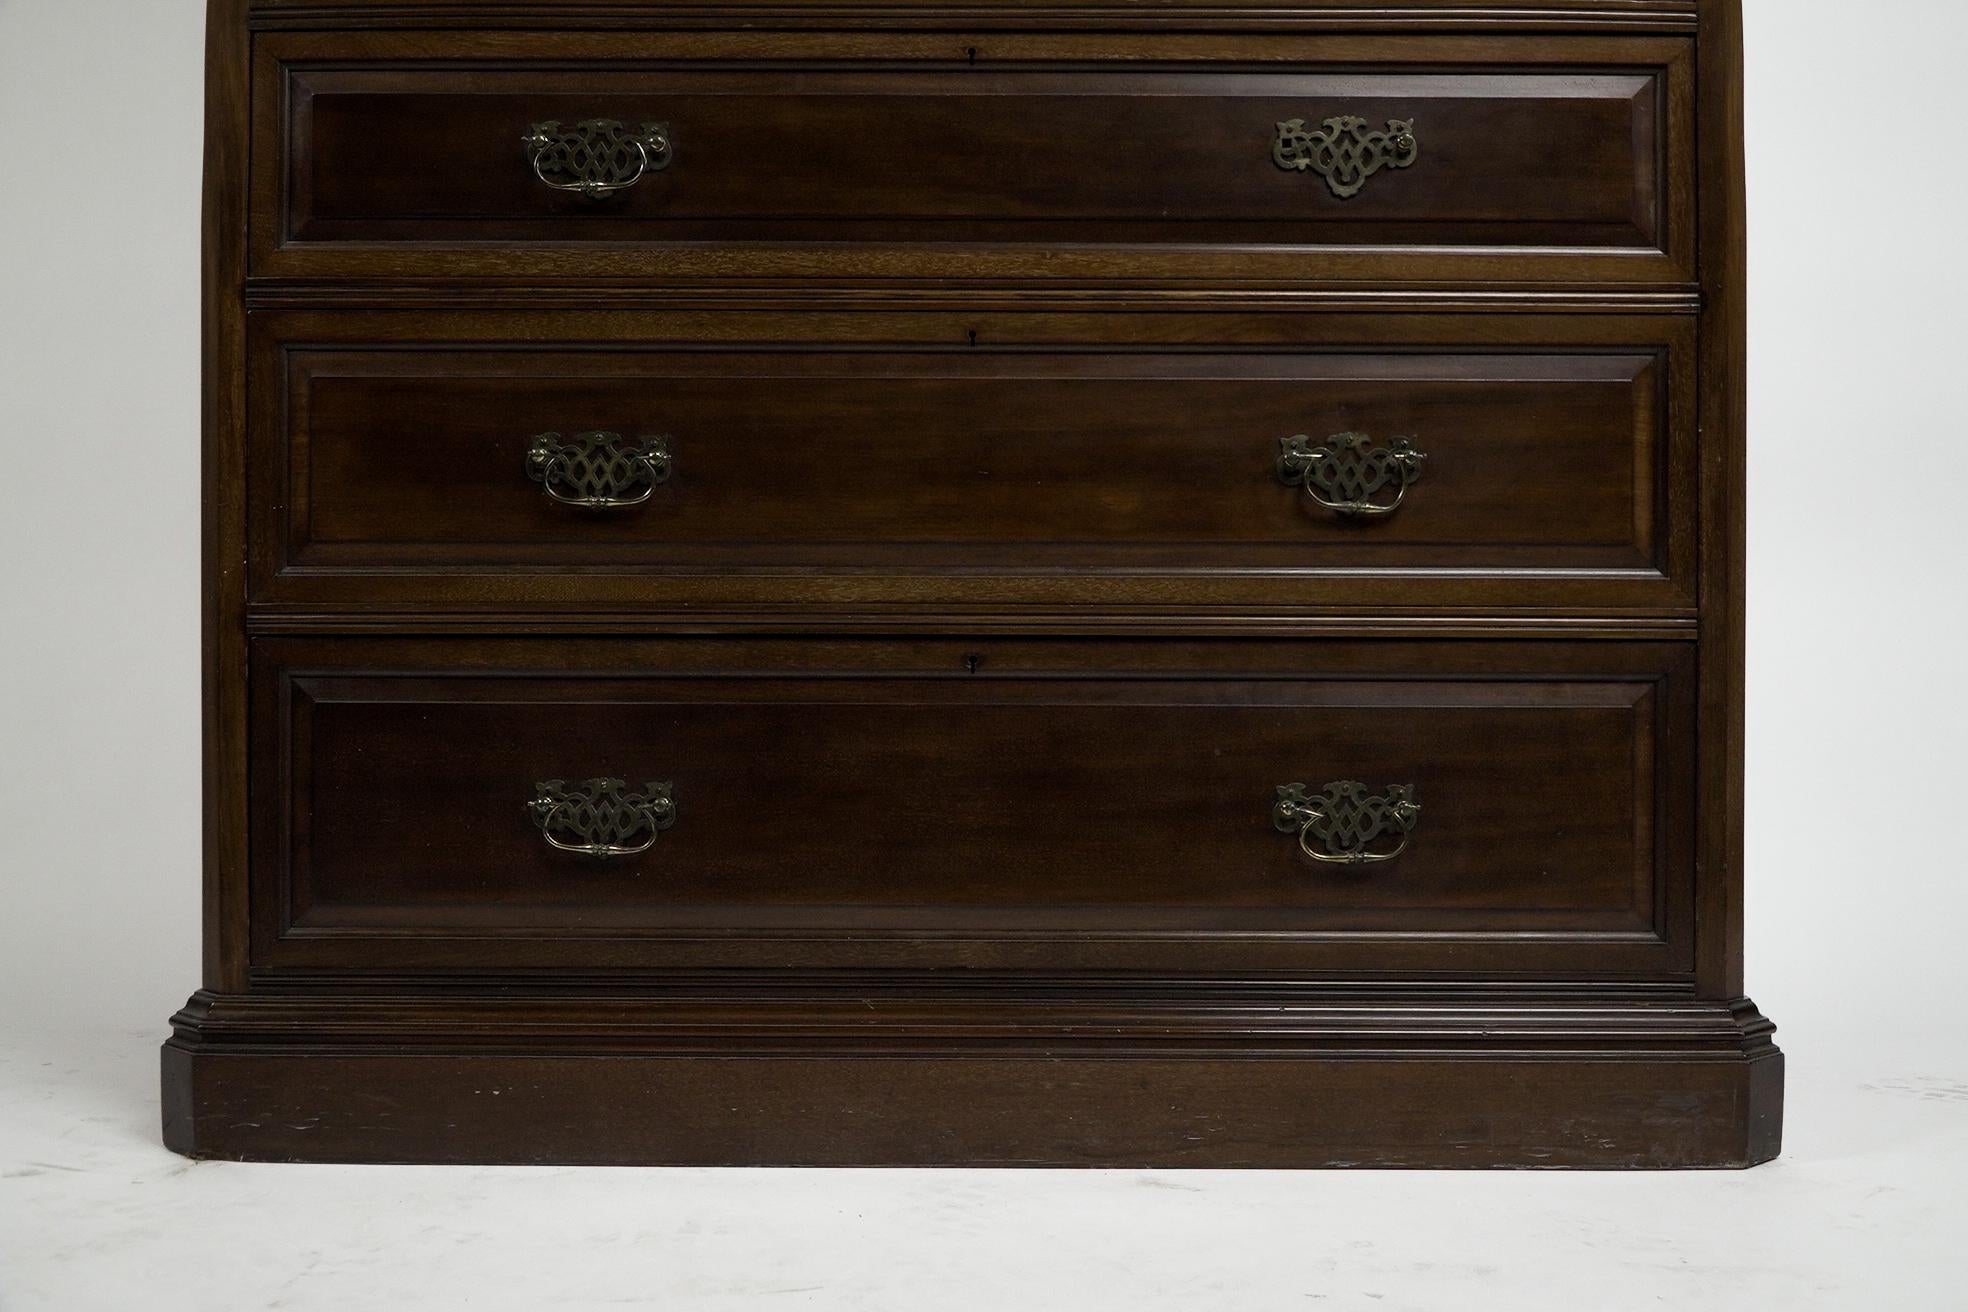 Morris & Co. An Aesthetic Movement Walnut tallboy with internal sliding drawers. For Sale 3